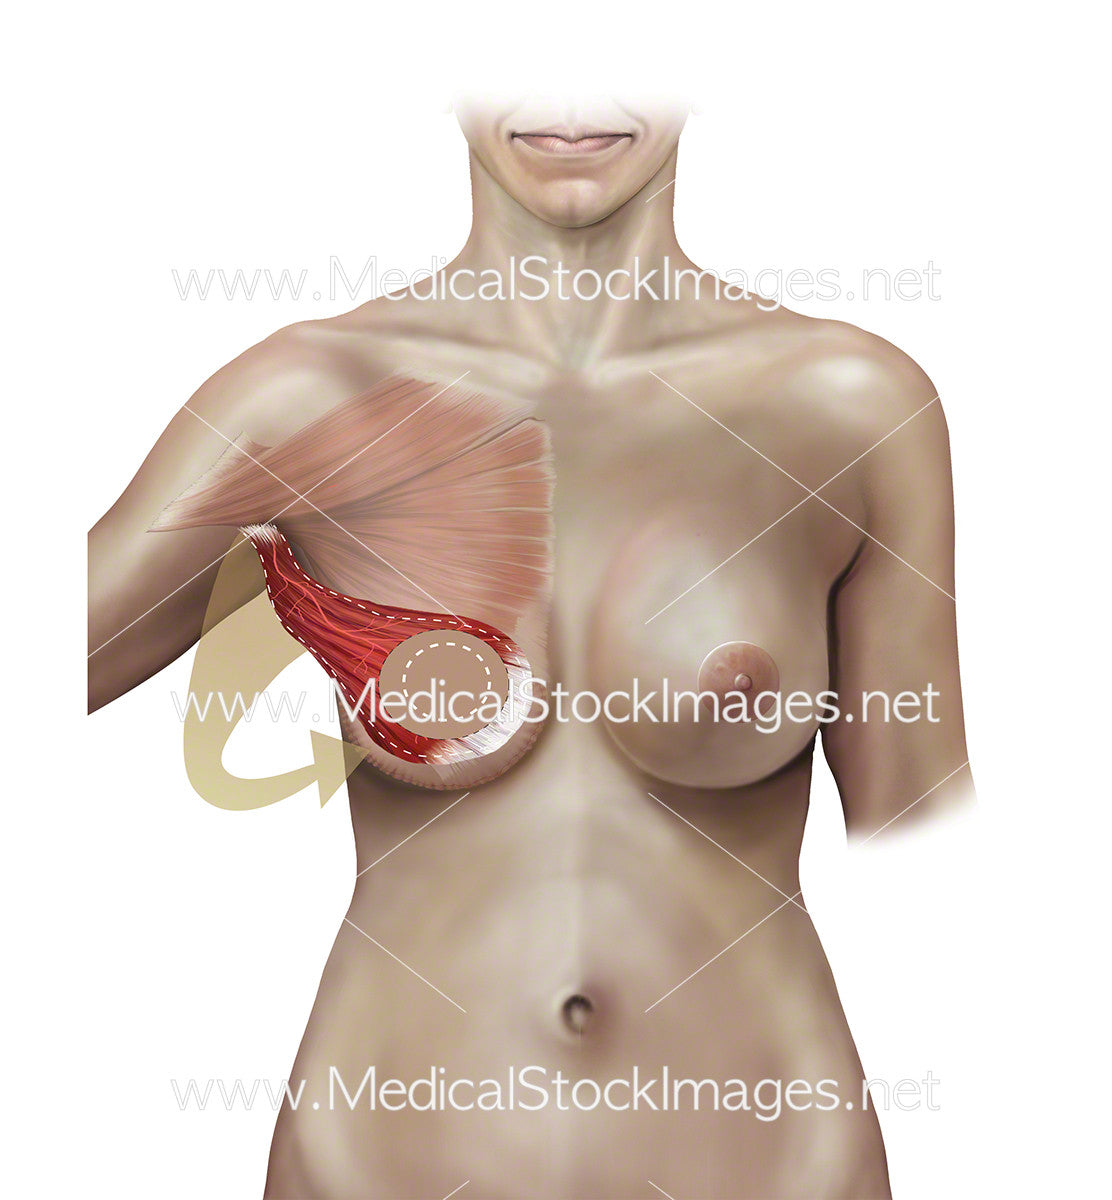 Stage C Autologous Breast Reconstruction – Medical Stock Images